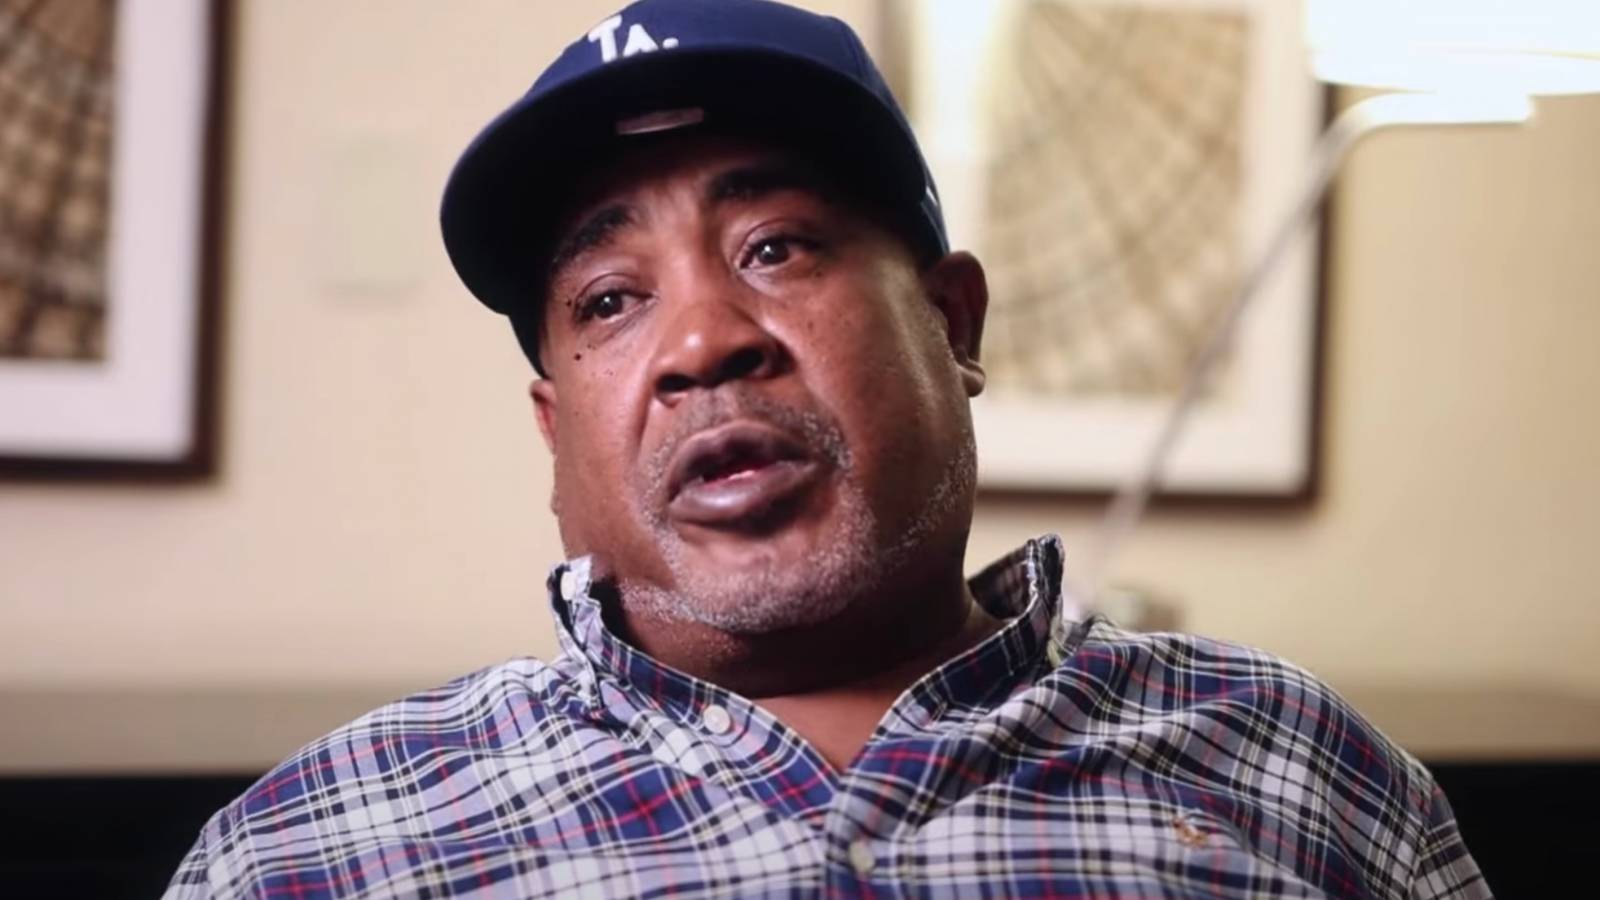 new-development-in-the-tupac-murder-case-keefe-ds-confessional-interview-raises-questions